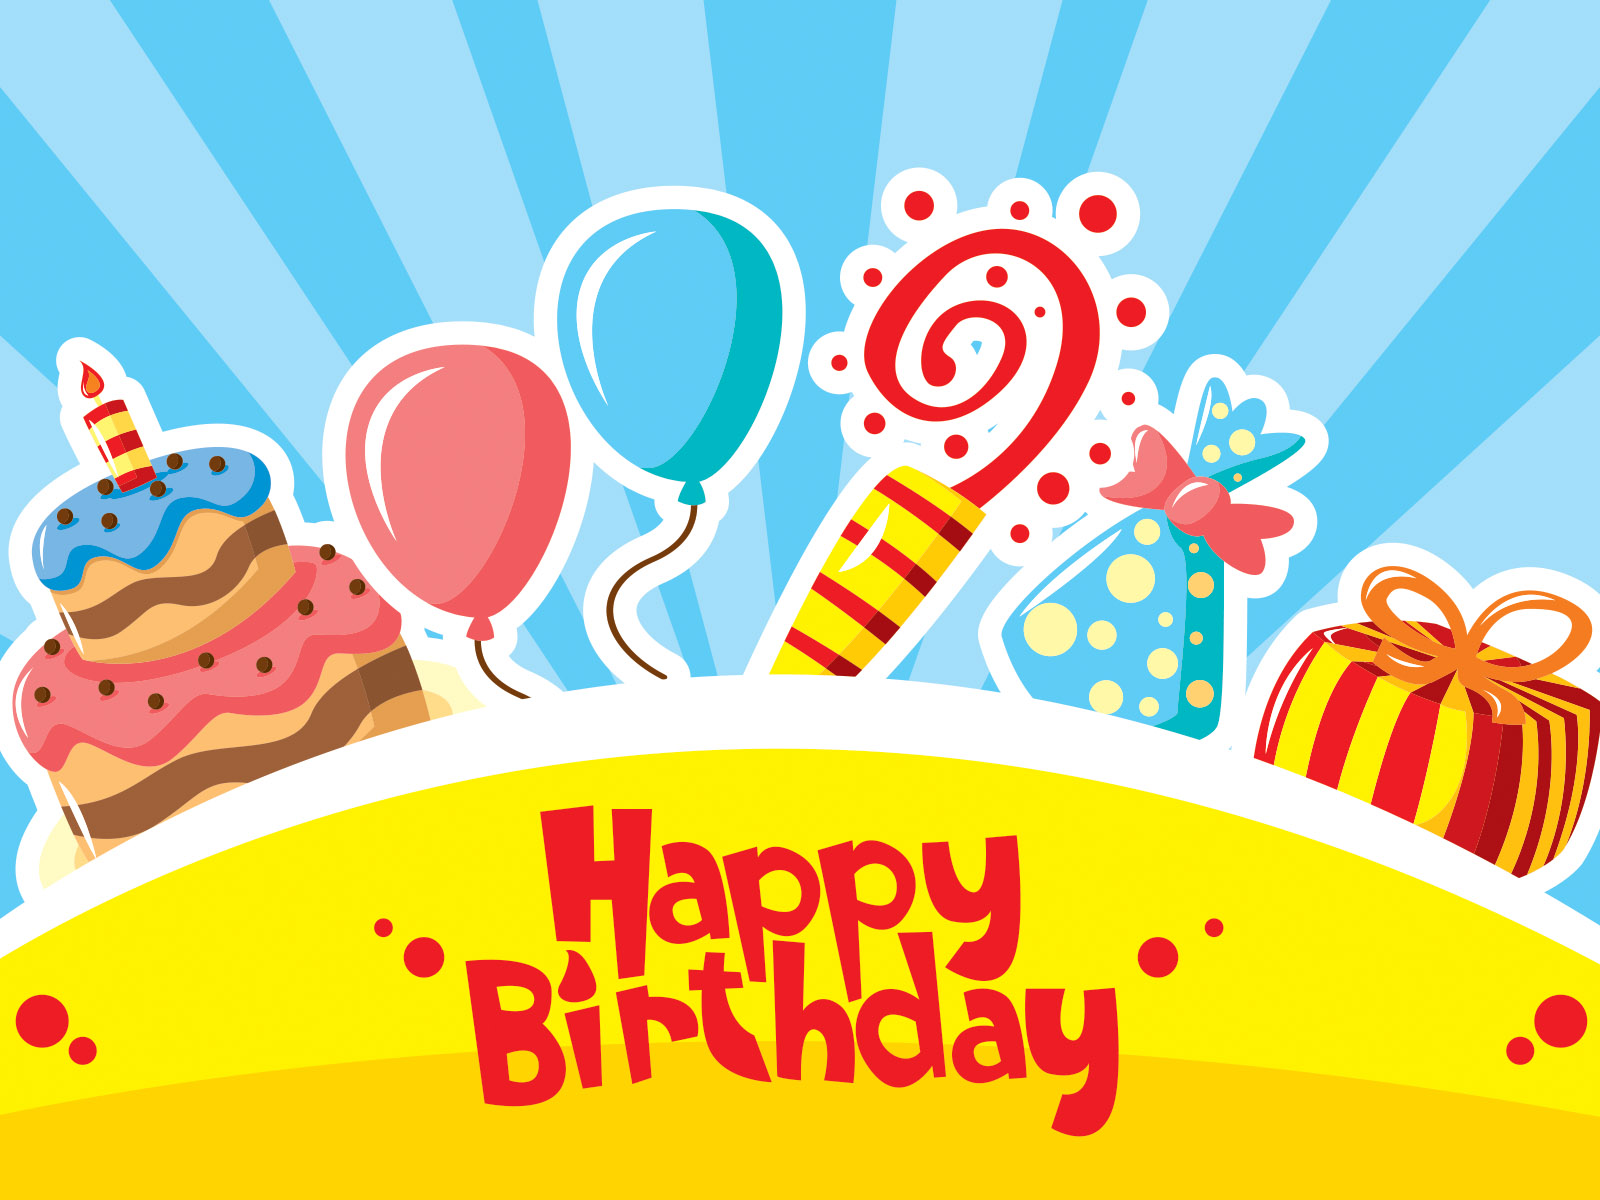 Happy Birthday Cake Powerpoint Templates Food & Drink, Holidays